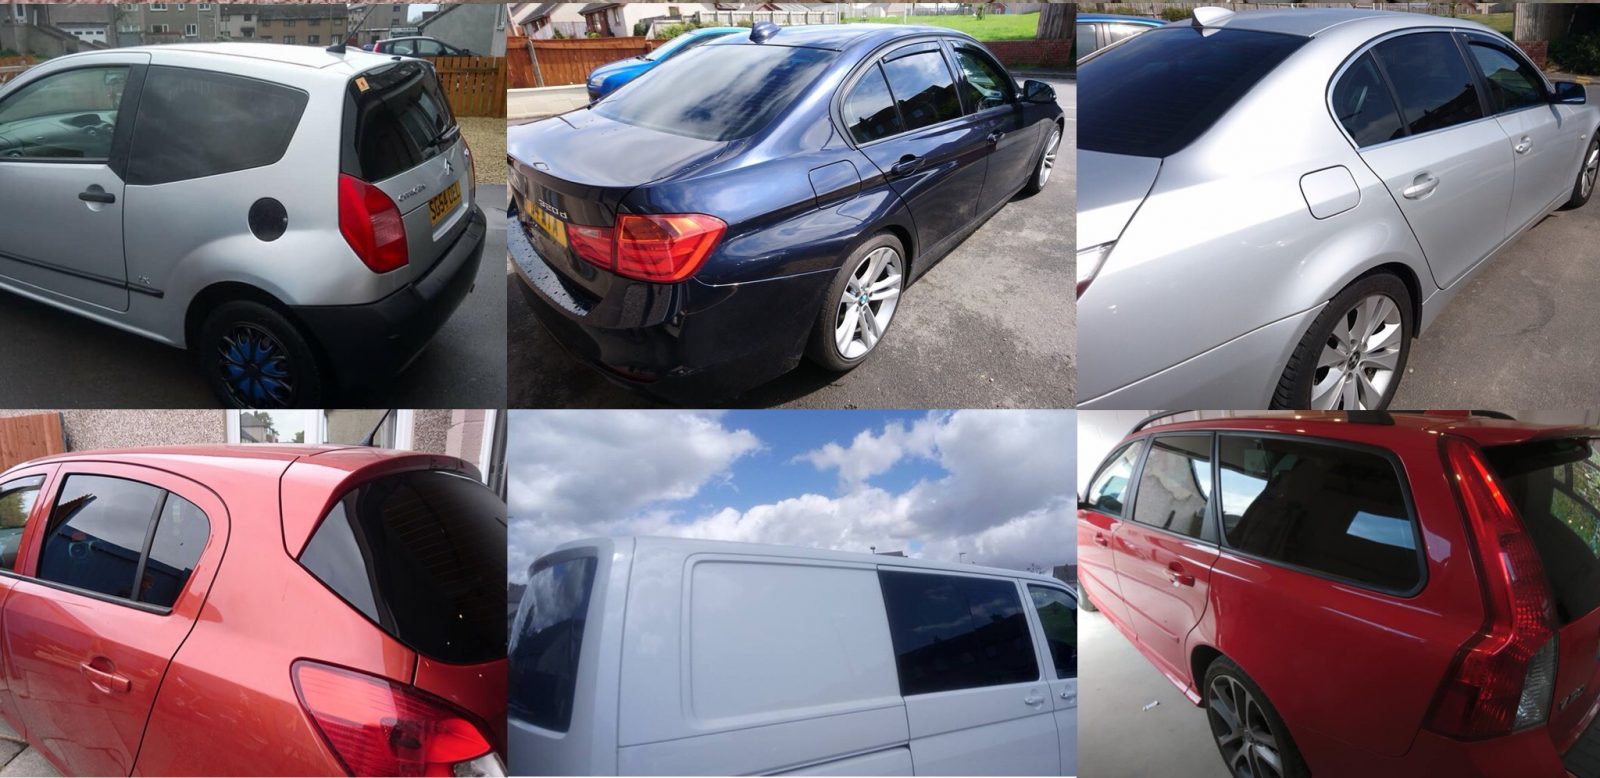 Total tint examples of customer cars after tinting work completed